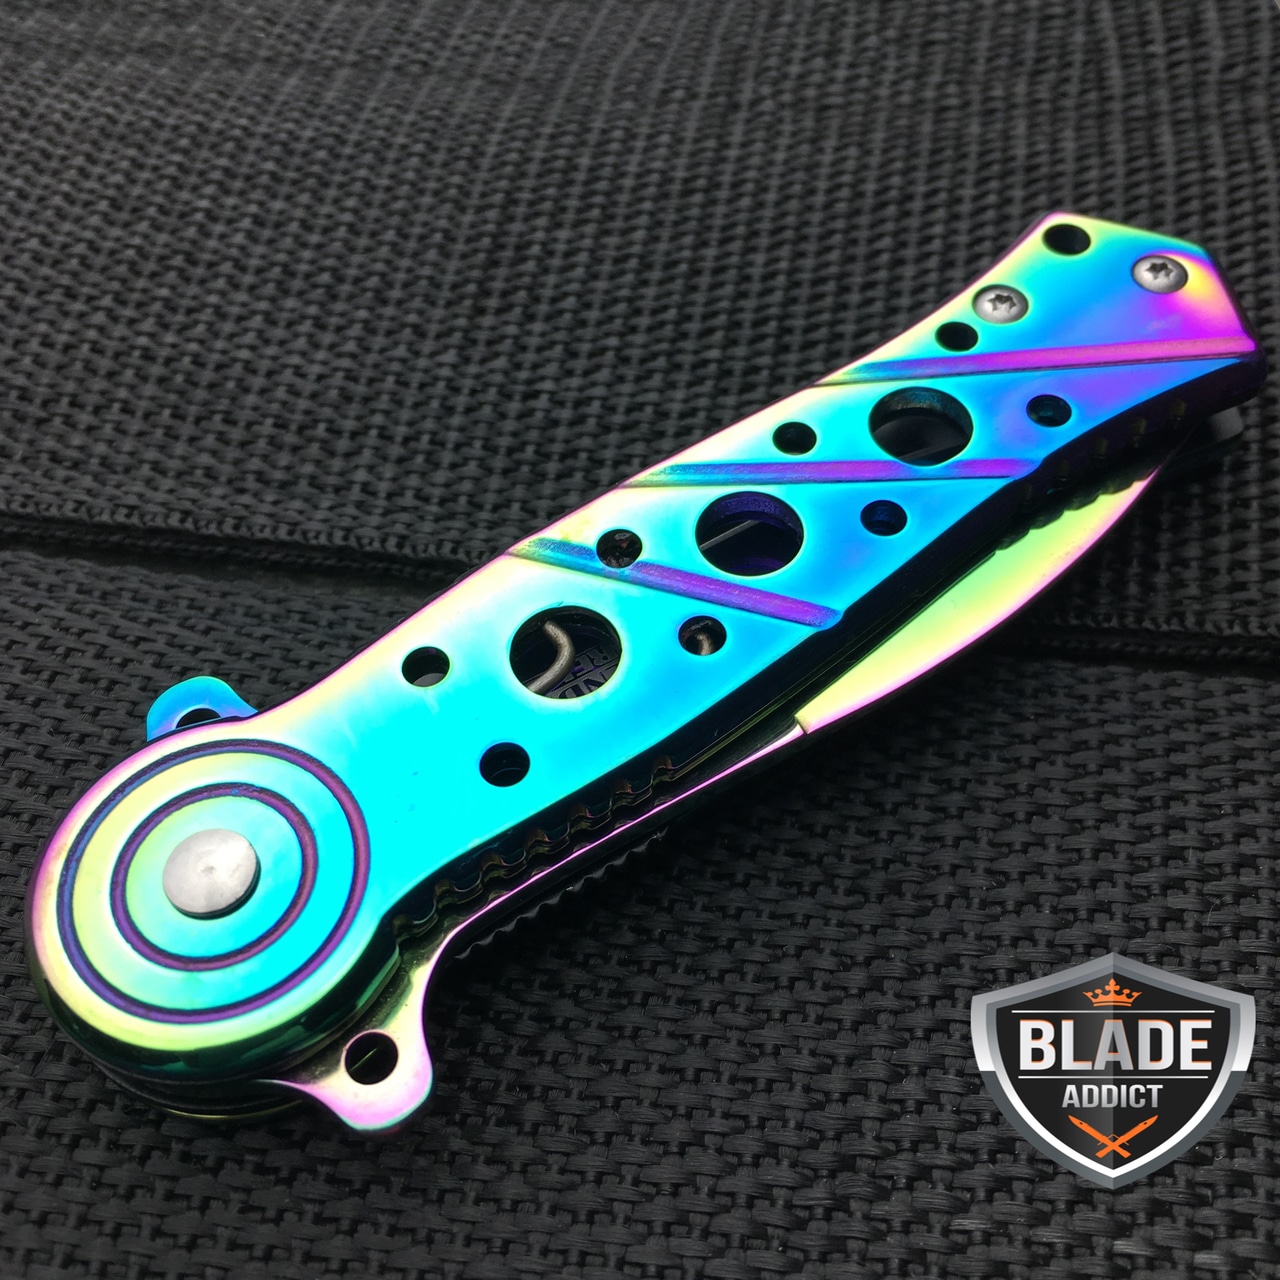 6.5" TITANIUM OXIDE RAINBOW TACTICAL SPRING ASSISTED OPEN FOLDING POCKET KNIFE 6